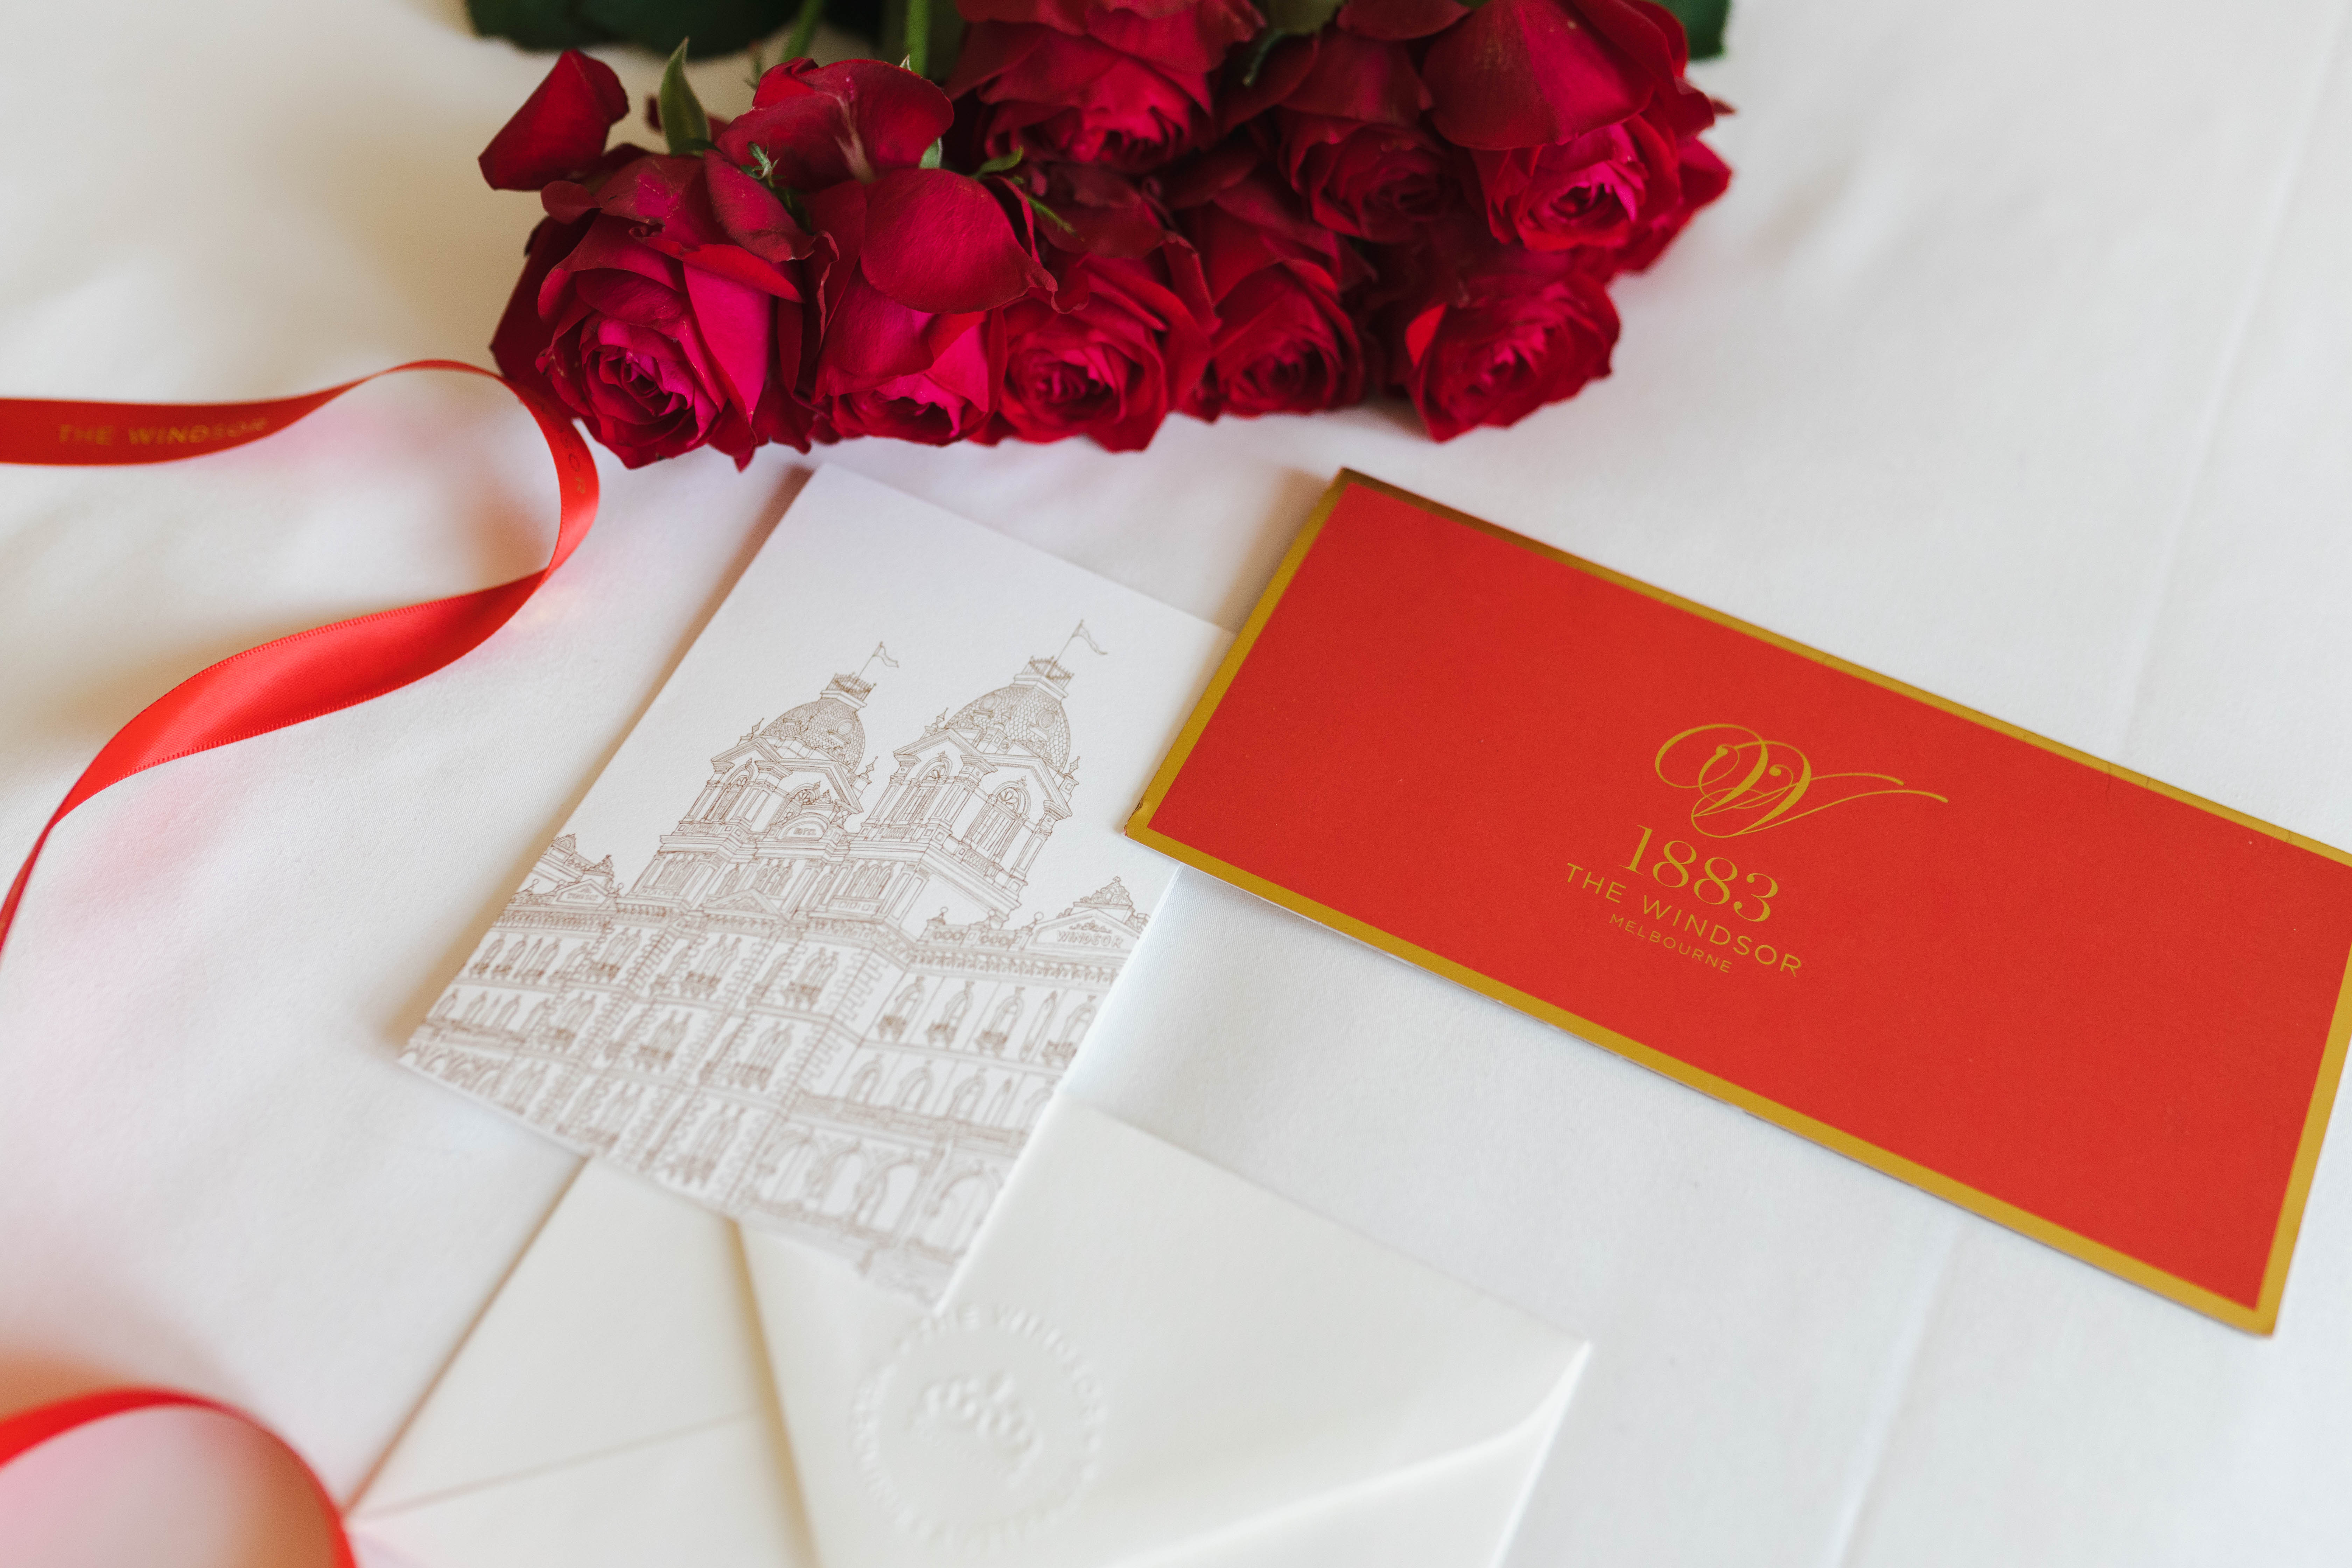 The Windsor's Red & Gold Gift Certificate with Ribbon